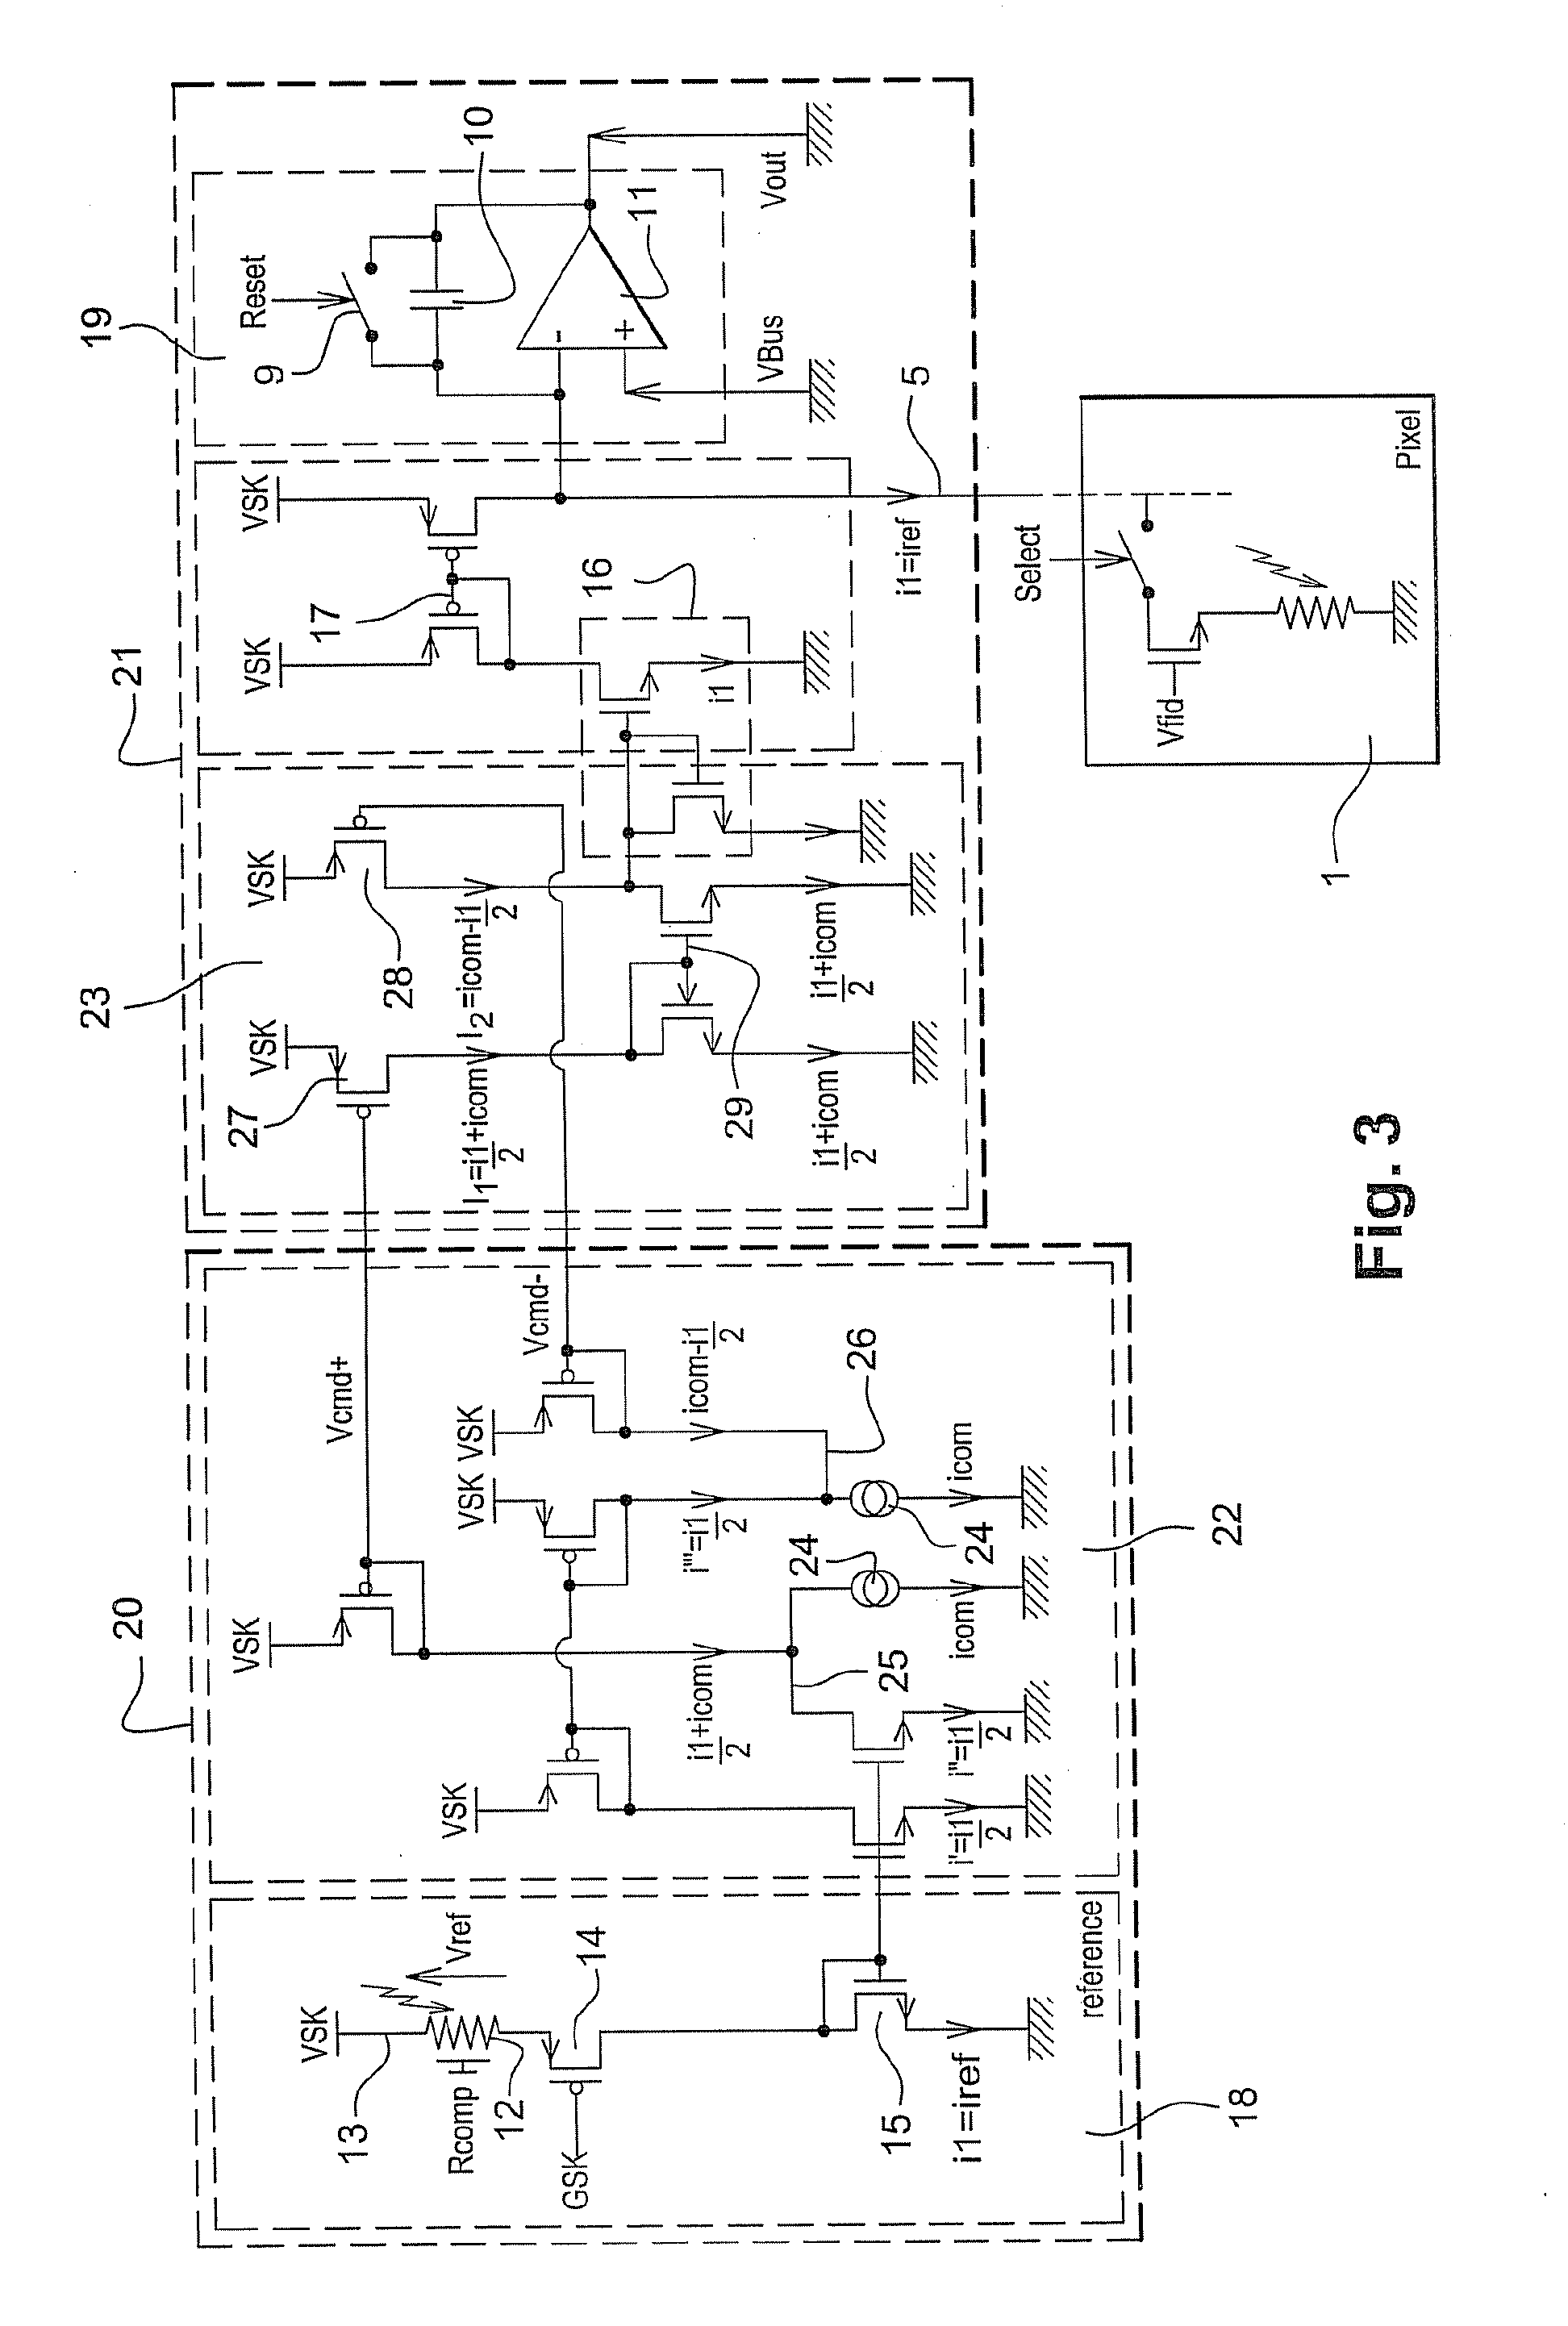 Device for detecting infrared radiation with bolometric detectors